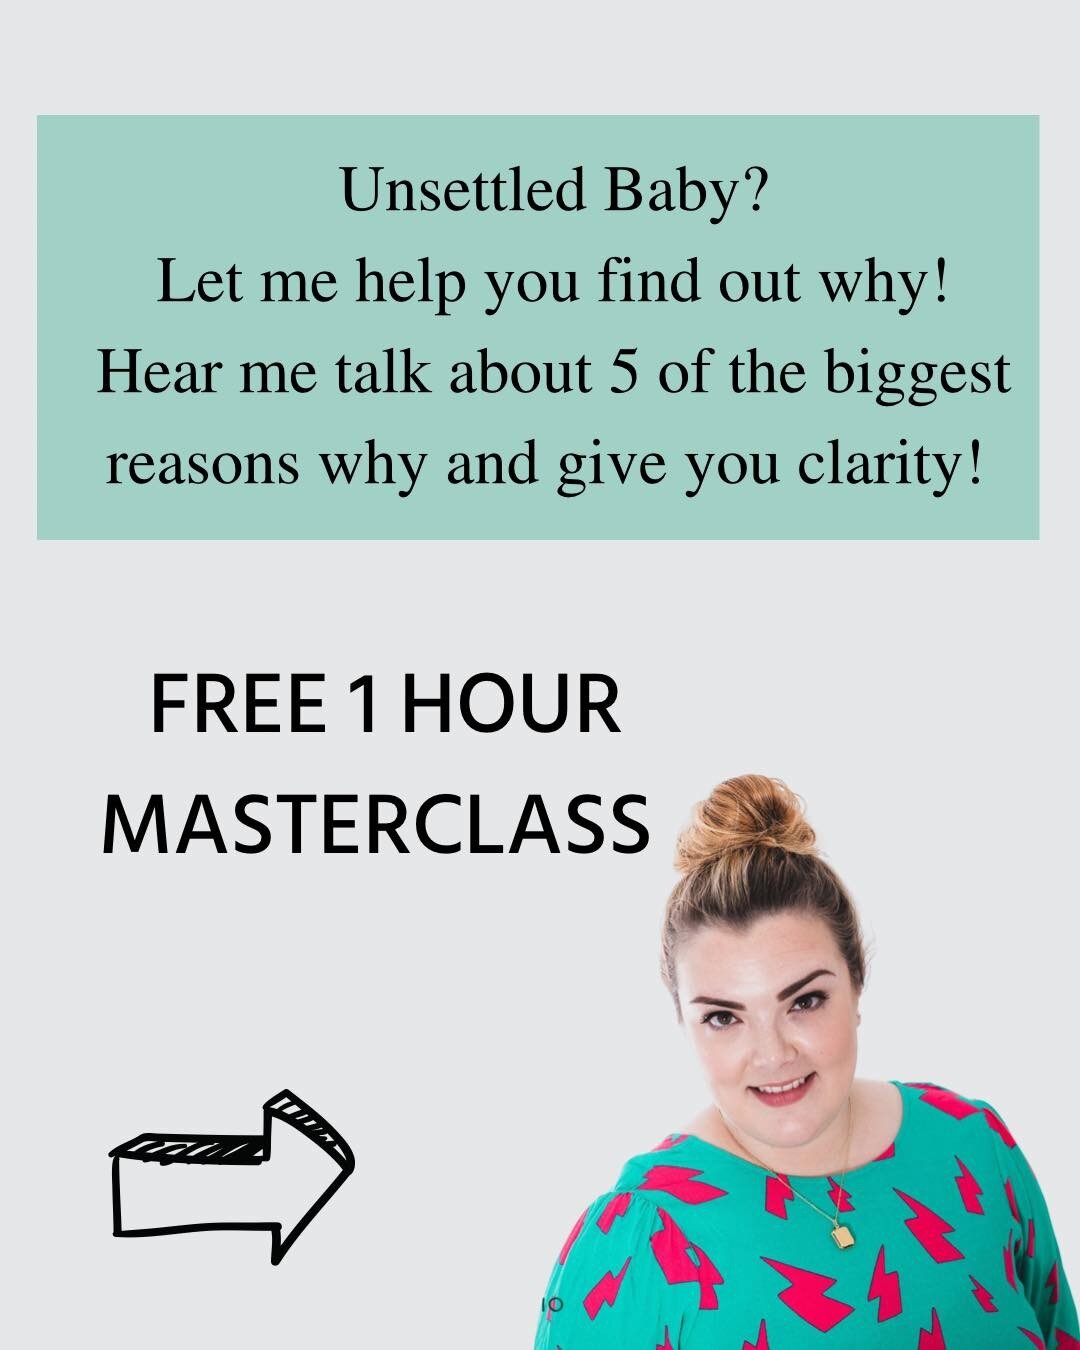 If your interested in how The Settled Baby Method can help you then attend my FREE masterclass on Monday 18th July at 10am where I talk about the top 5 things that may be causing your baby to reflux, struggle with wind, wake frequently and cry excess